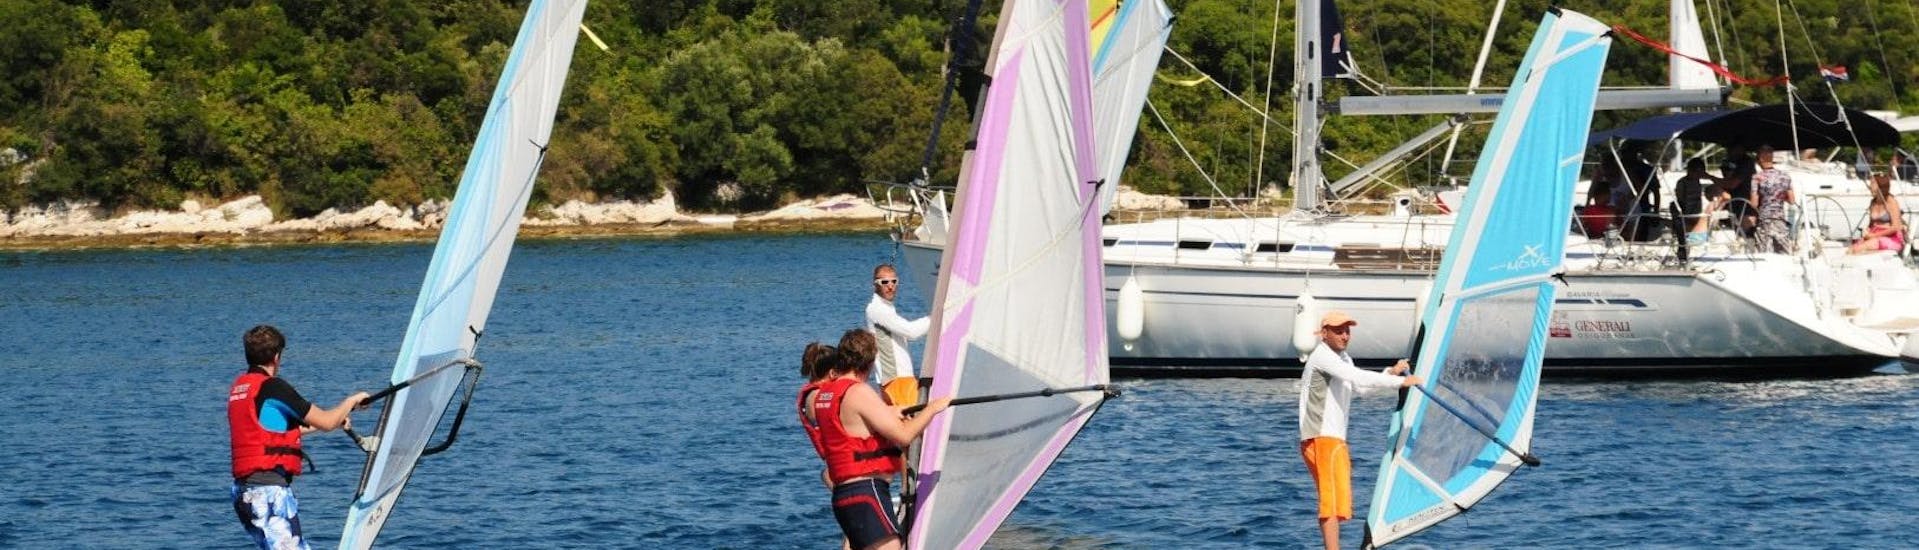 Windsurfing "Intro Course" for Kids & Adults - Beginner.